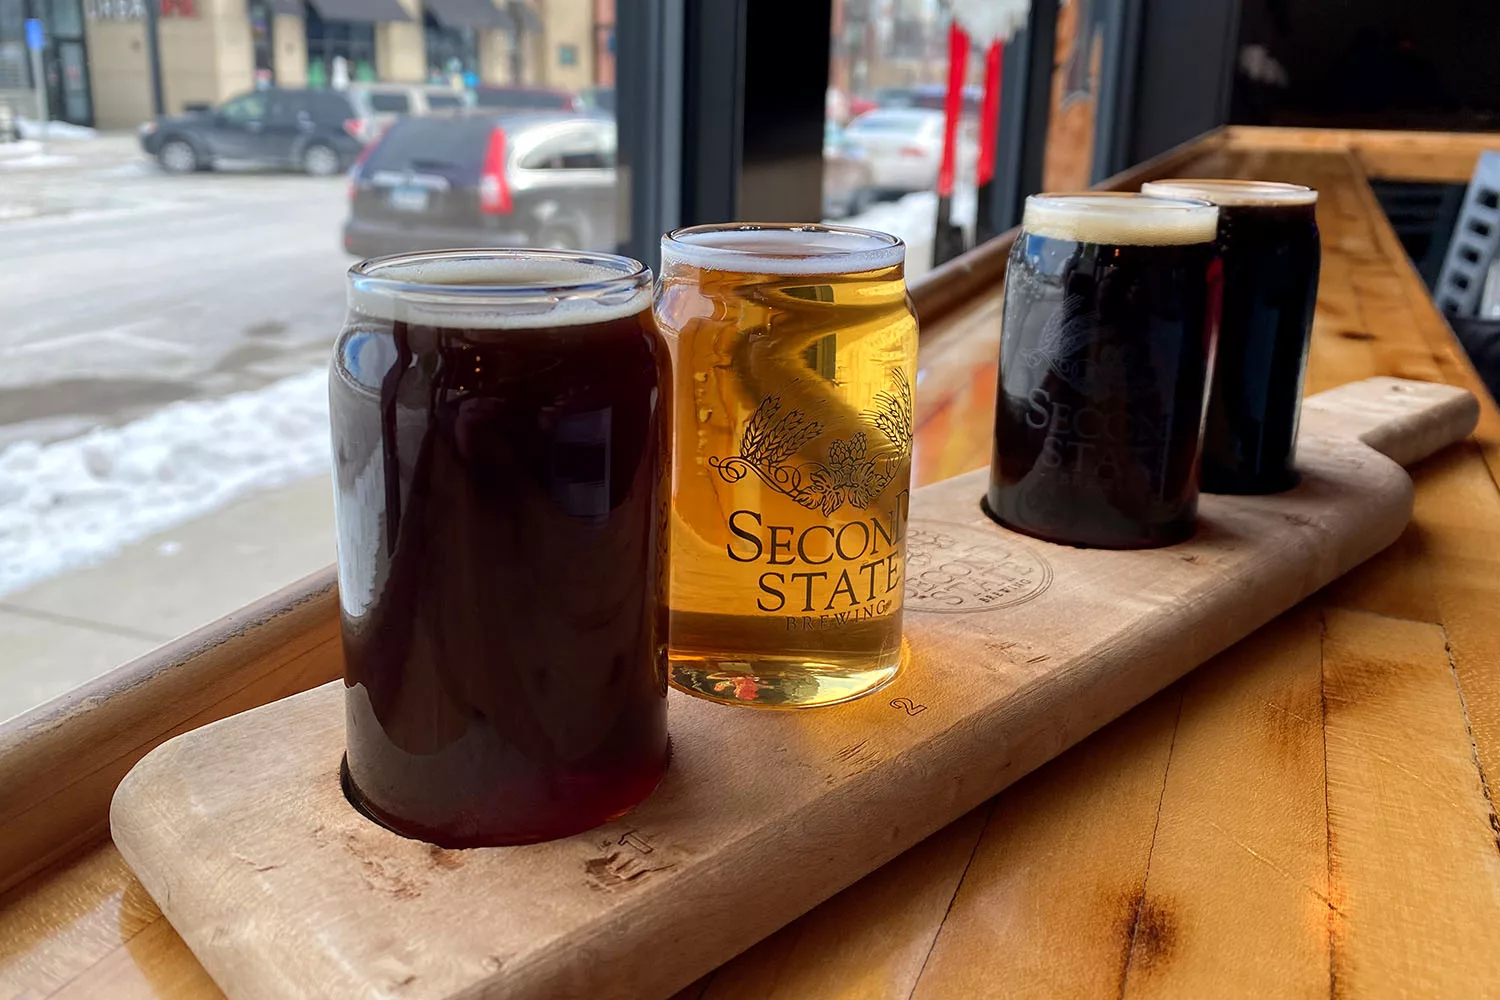 Flight of four beers at Second State Brewing Co. in Cedar Falls, Iowa